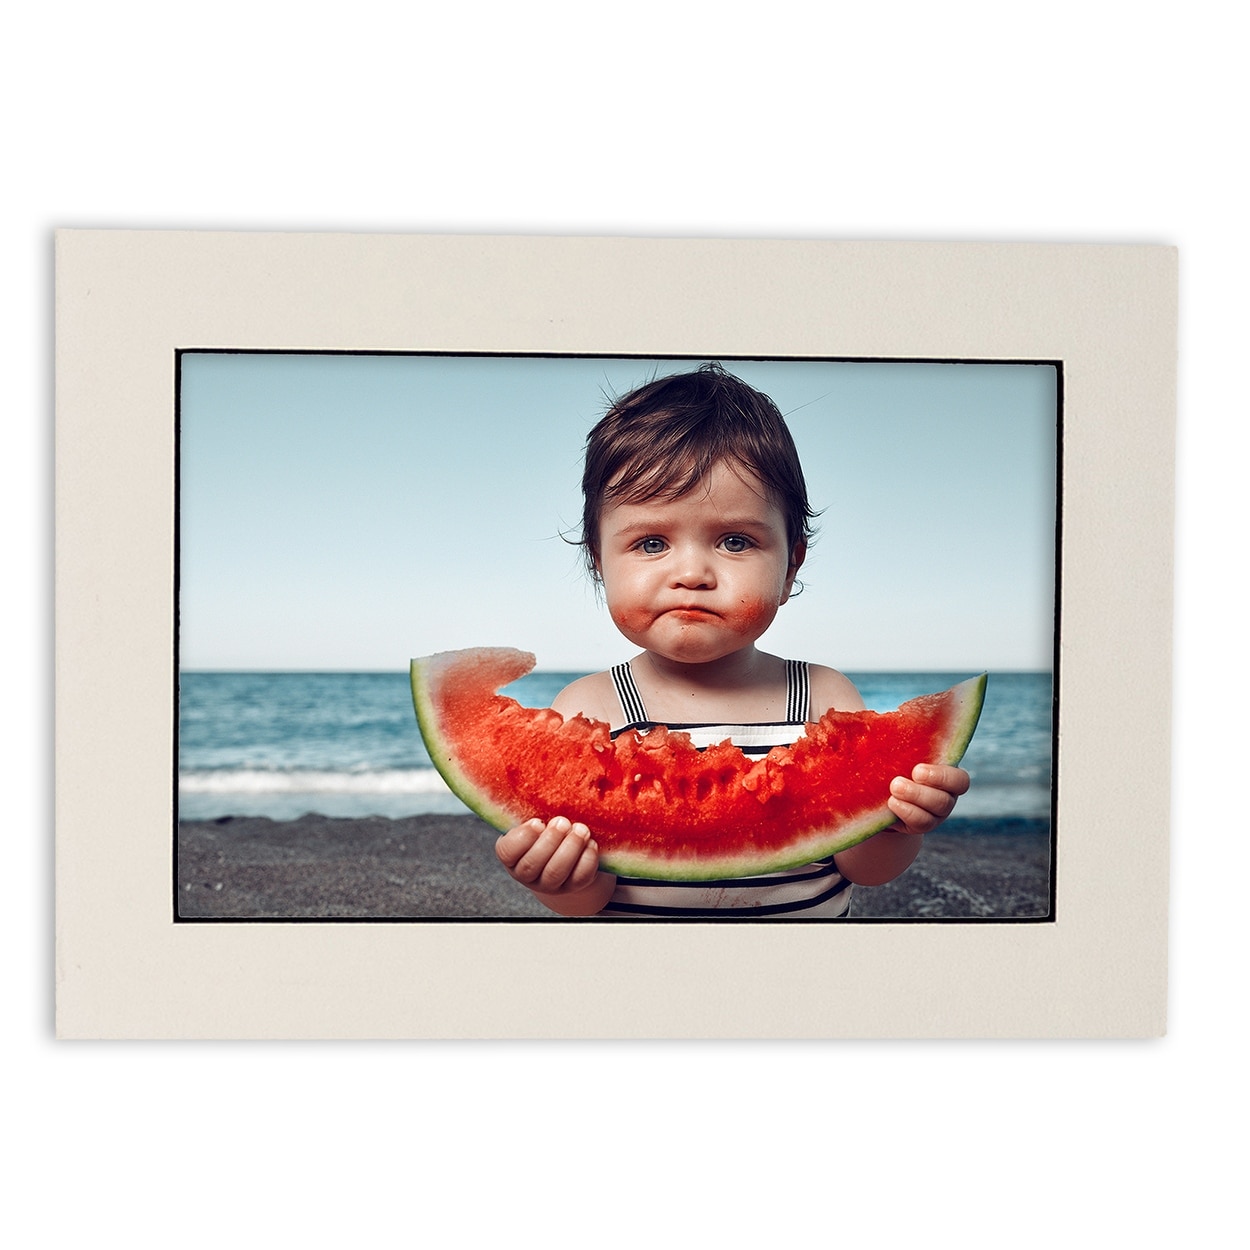 18x24 Mat for 12x18 Photo - White with Black Core Matboard for Frames  Measuring 18 x 24 In - To Display Art Measuring 12 x 18 In - Bed Bath &  Beyond - 38871439